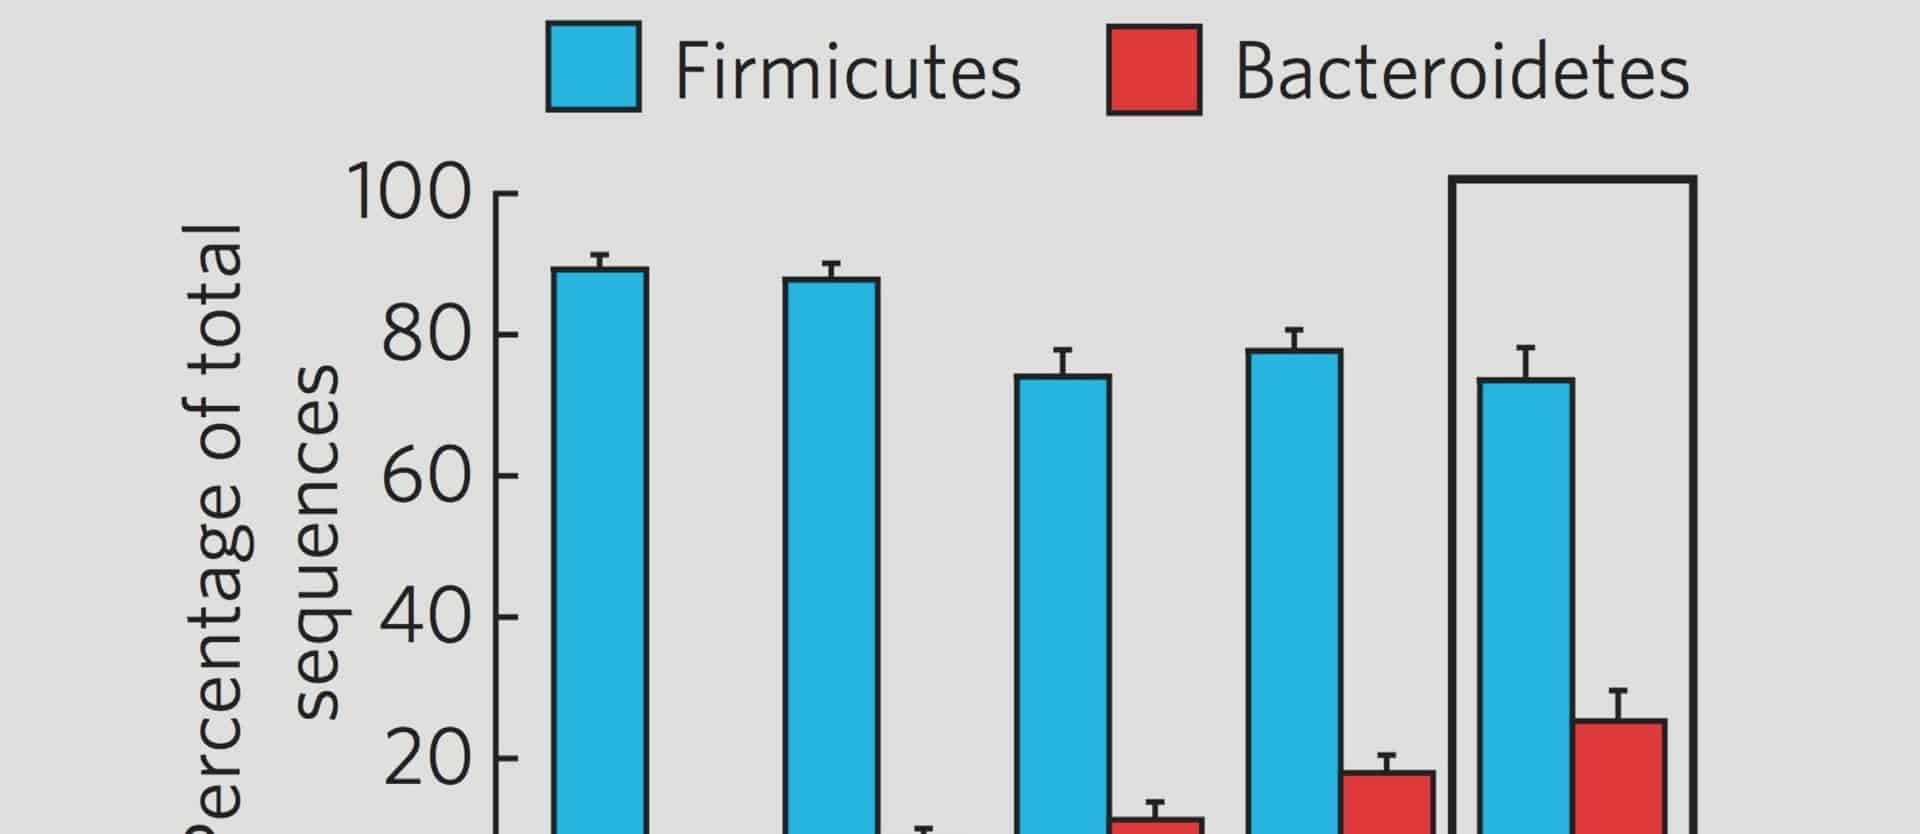 Tipping Firmicutes to Bacteroidetes